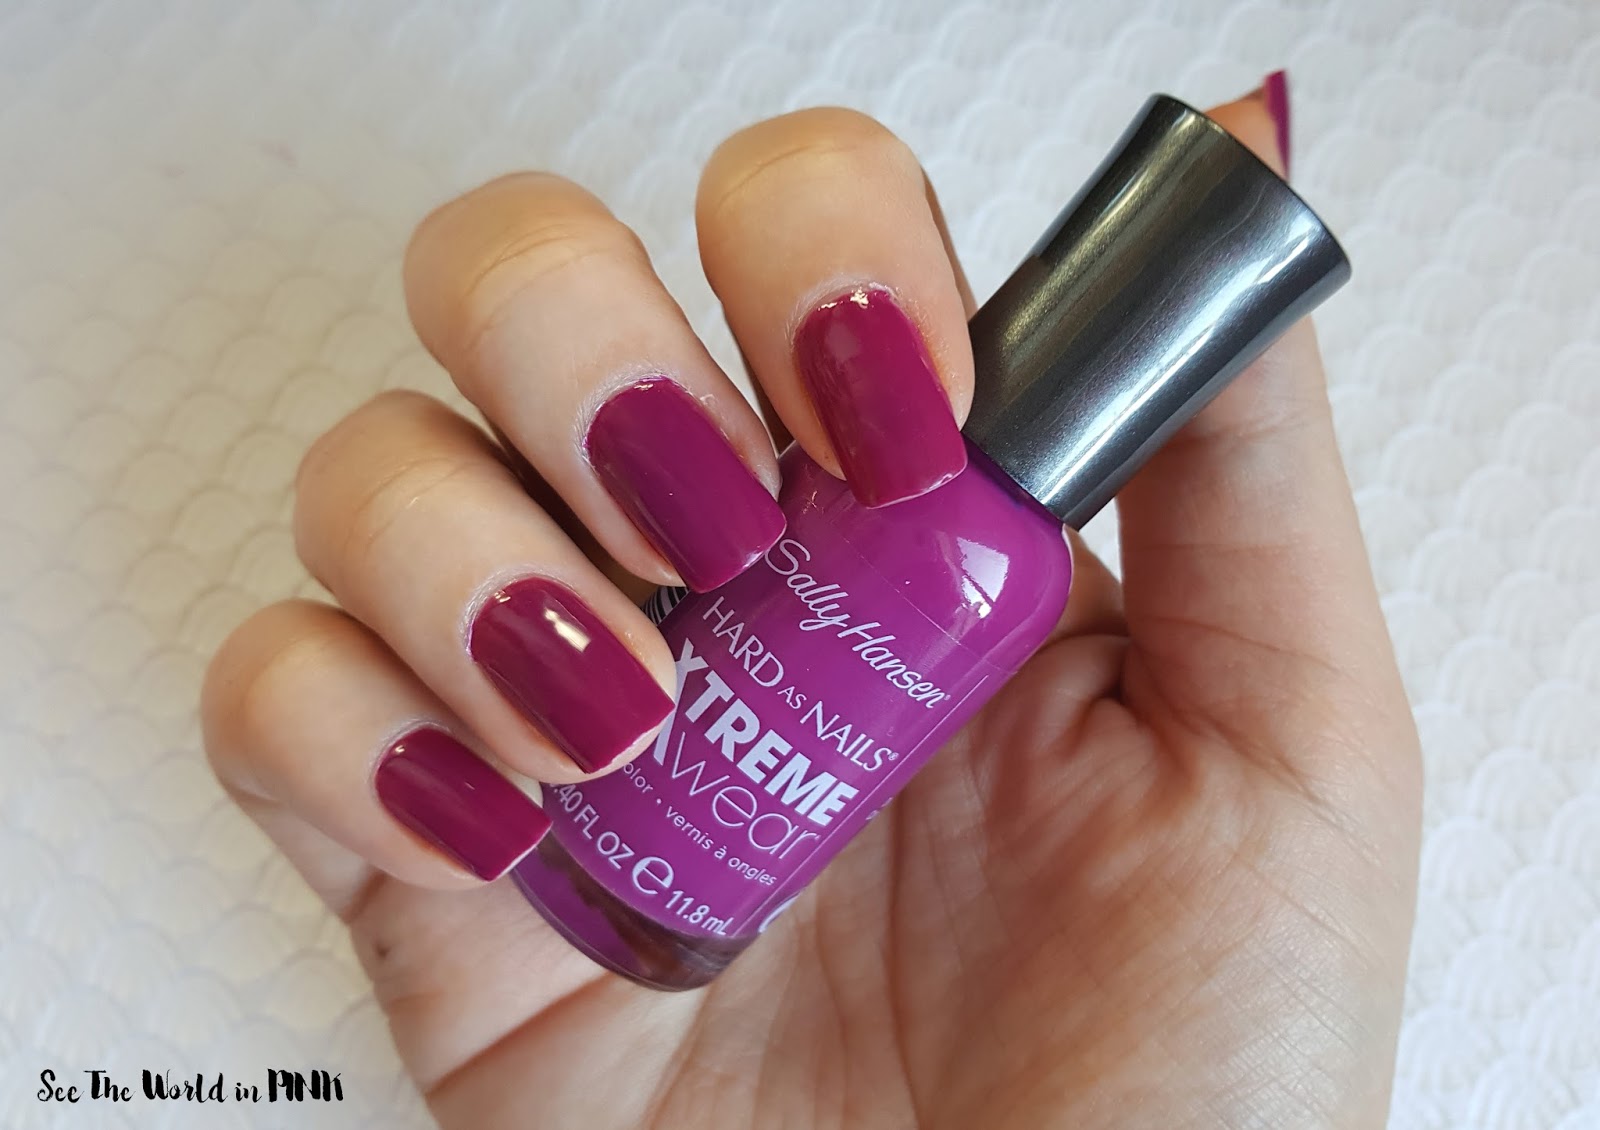 Manicure Tuesday - Sally Hansen Hard As Nails Xtreme Wear Polish in  Pep-plum! | See the World in PINK